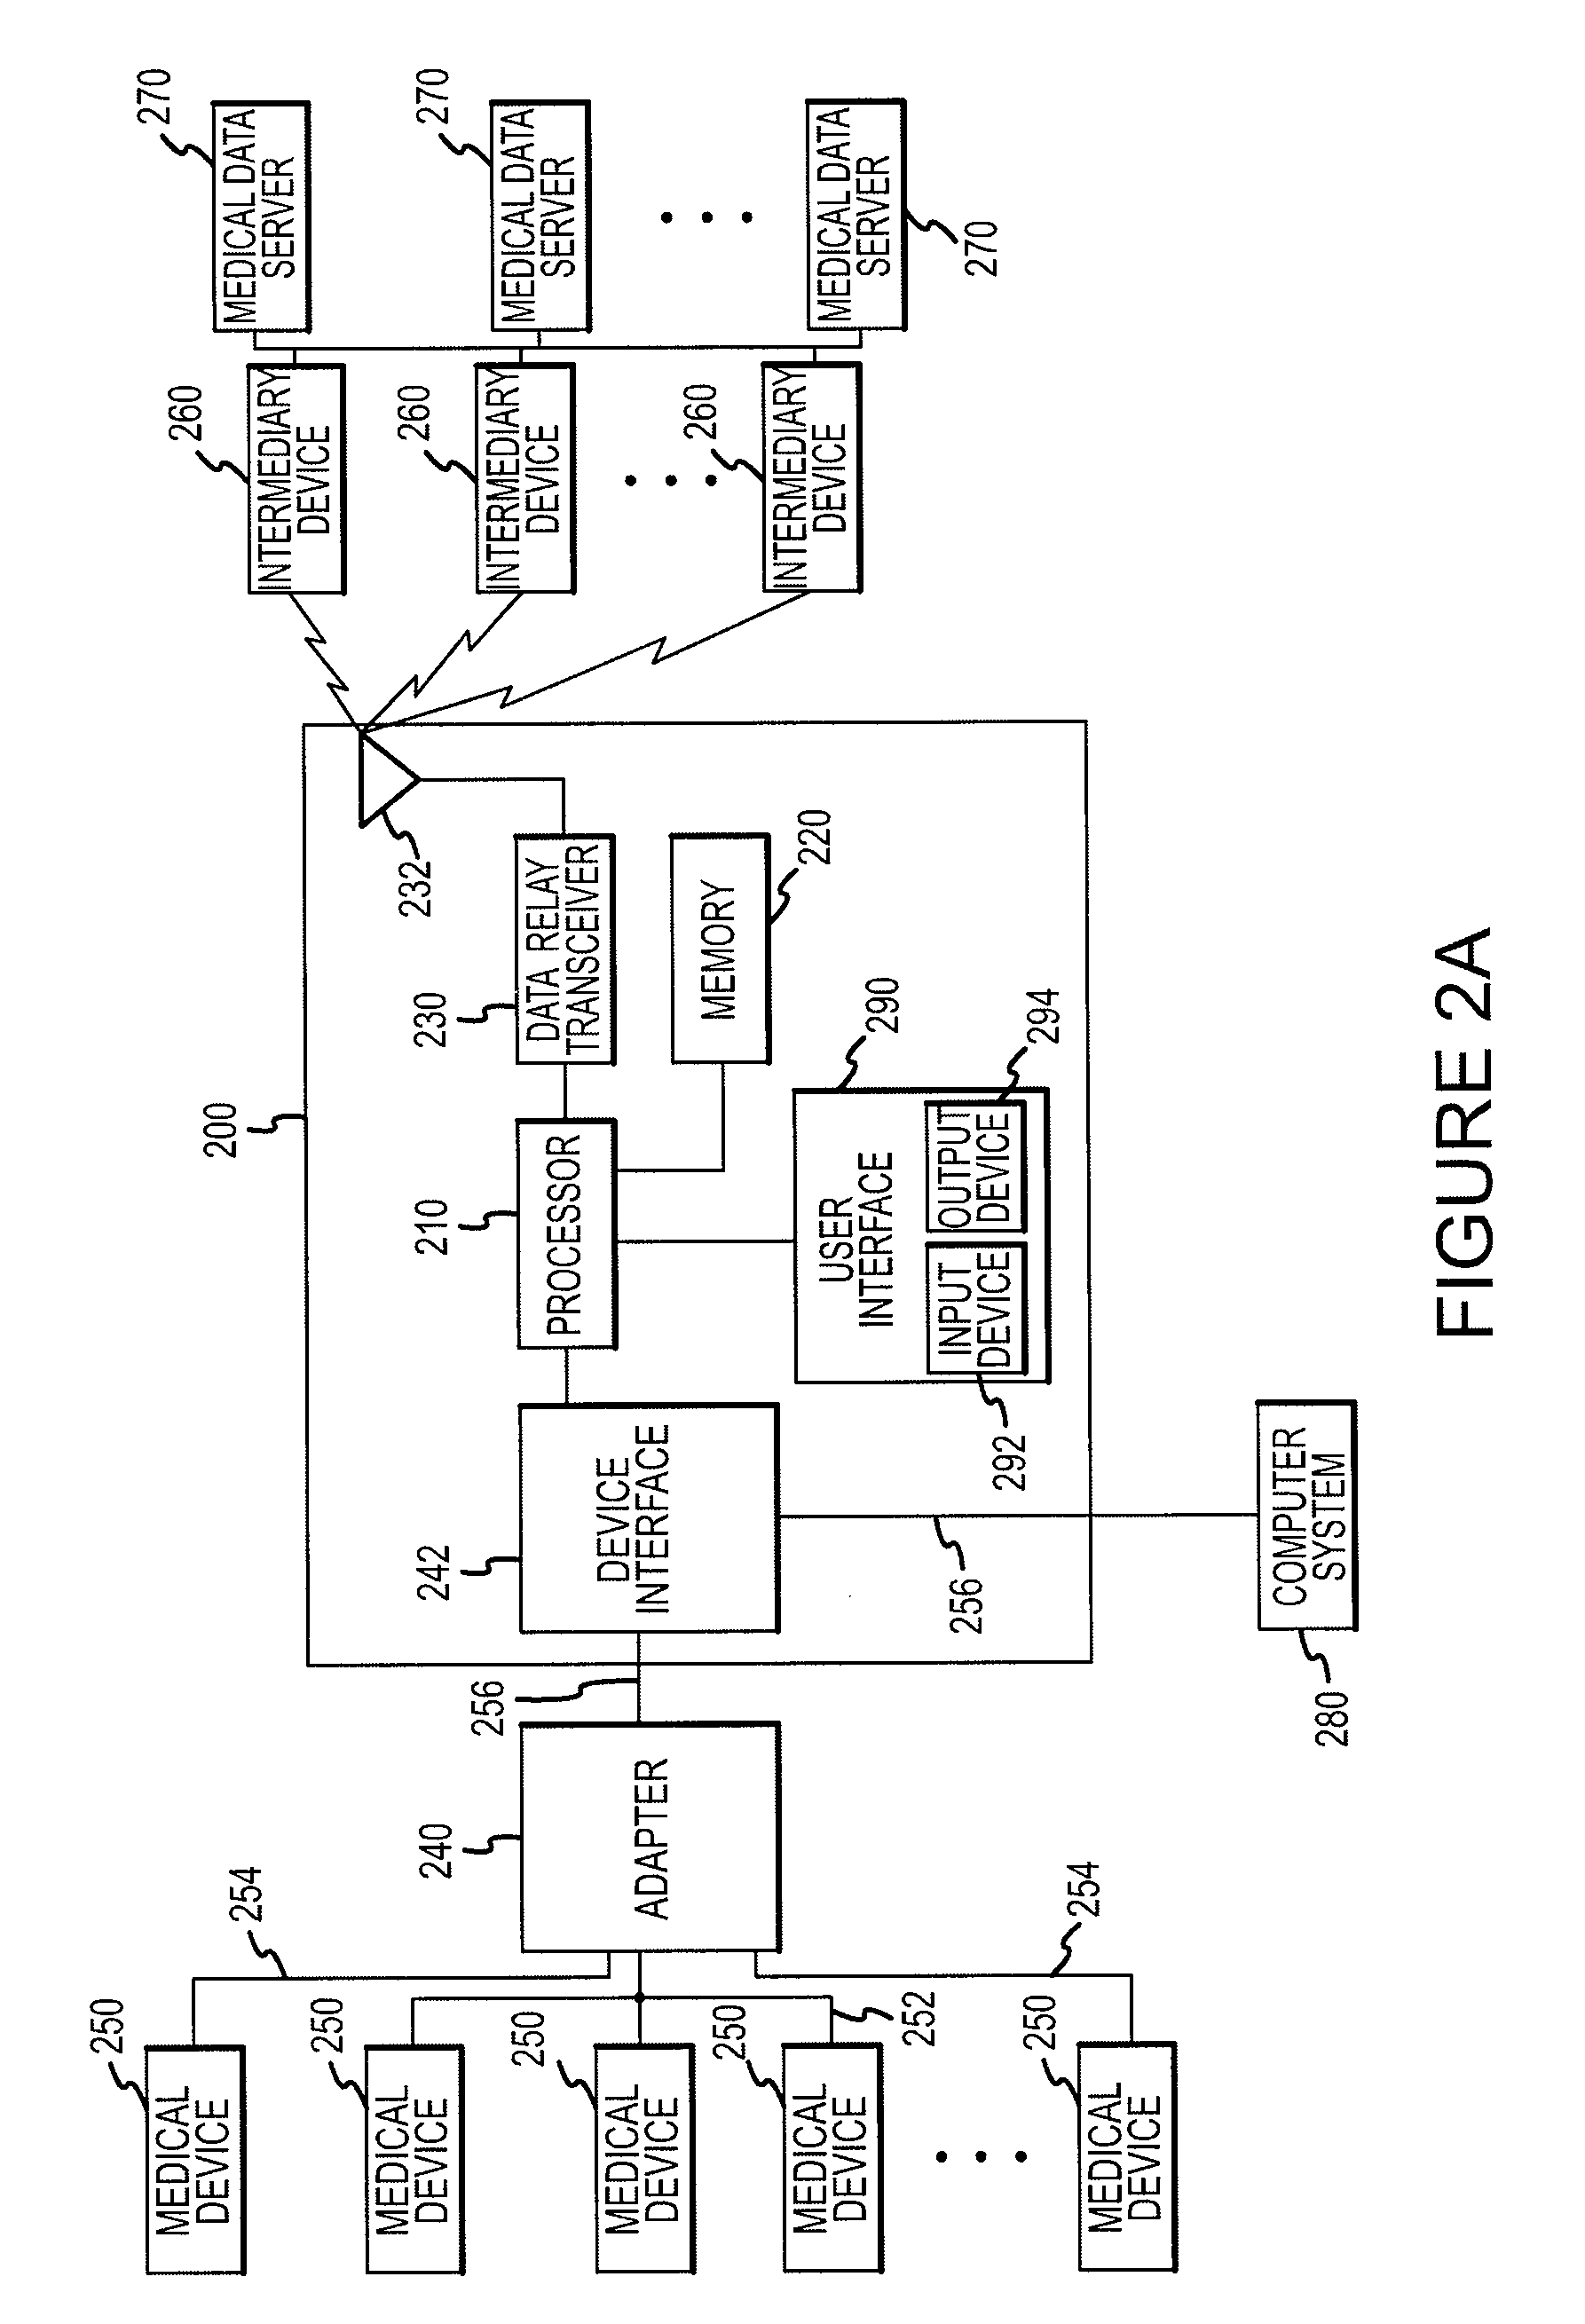 Methods for remote provisioning of eletronic devices